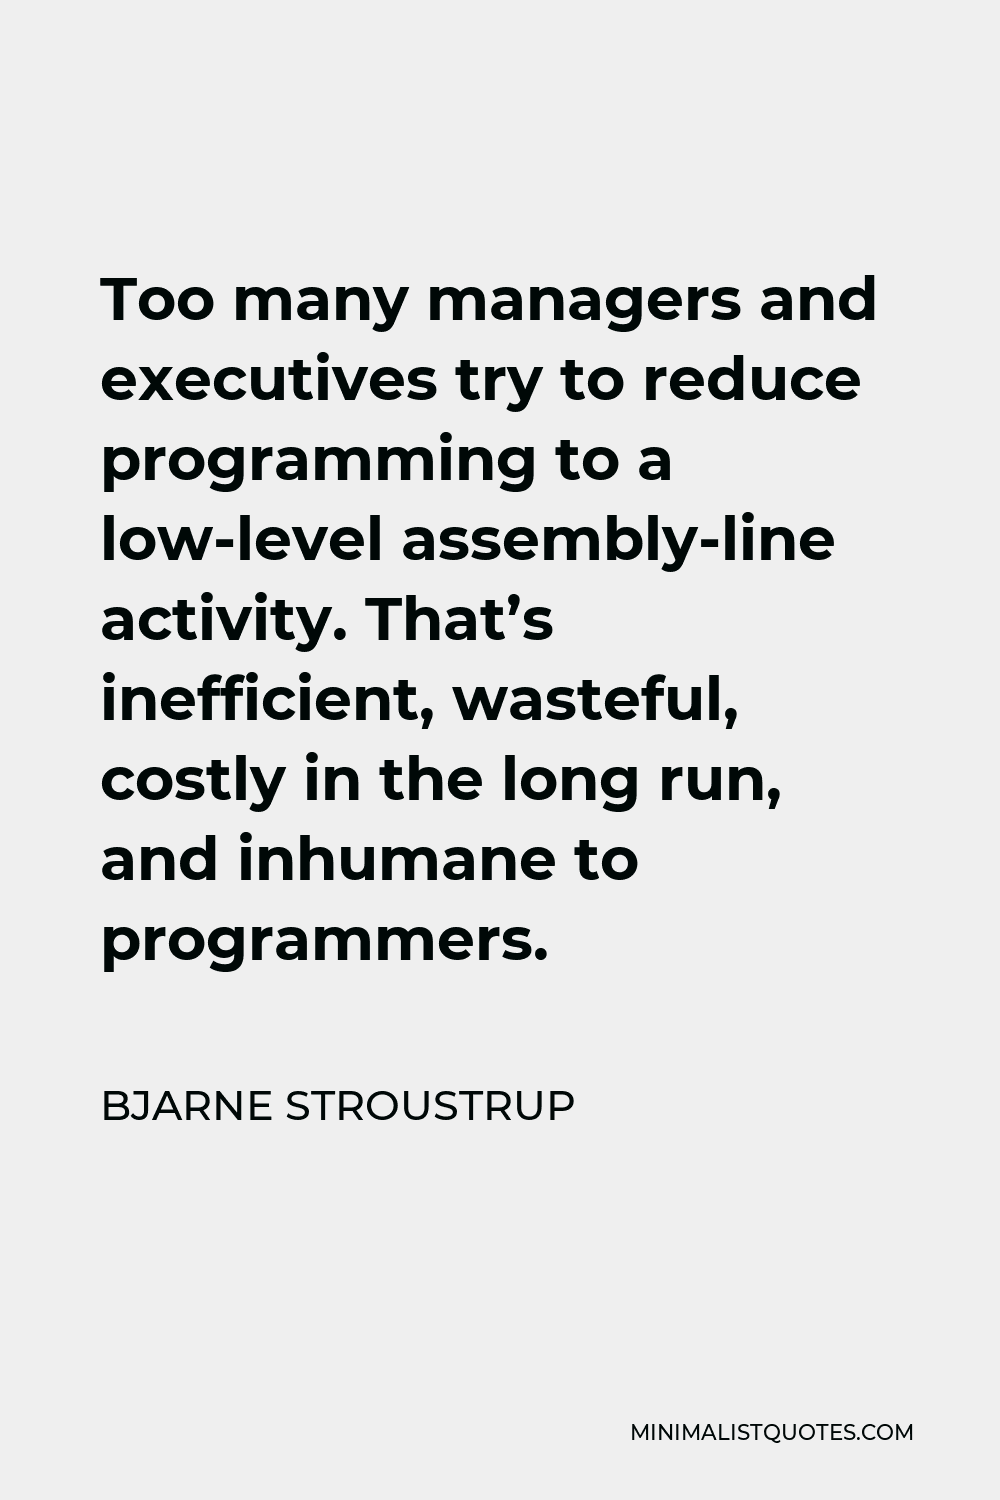 Bjarne Stroustrup Quote - Too many managers and executives try to reduce programming to a low-level assembly-line activity. That’s inefficient, wasteful, costly in the long run, and inhumane to programmers.